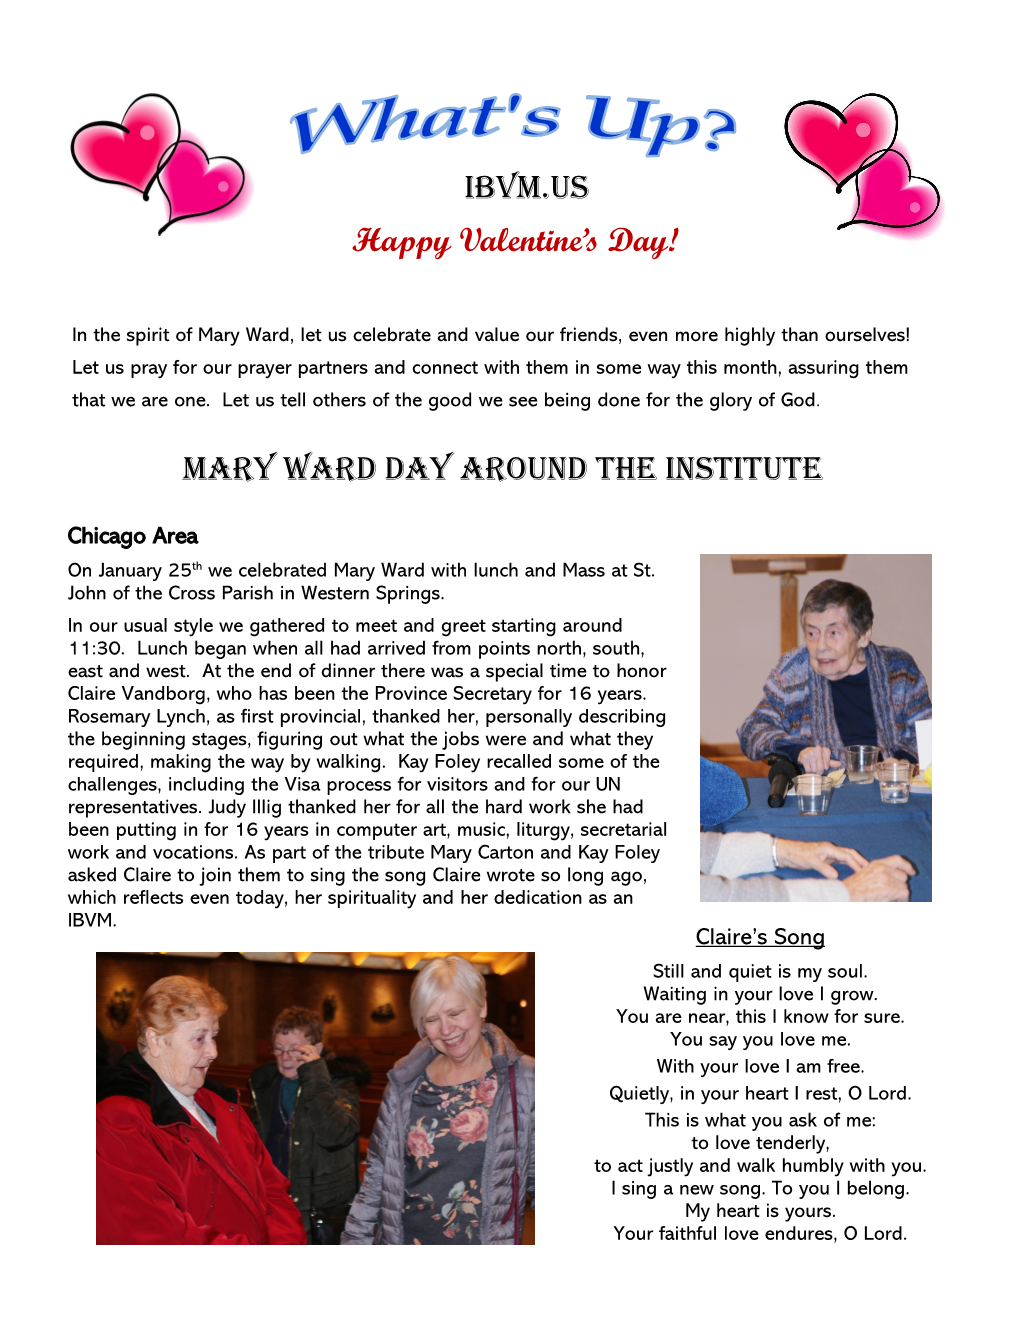 Mary Ward Day Around the Institute Happy Valentine's Day! IBVM.US